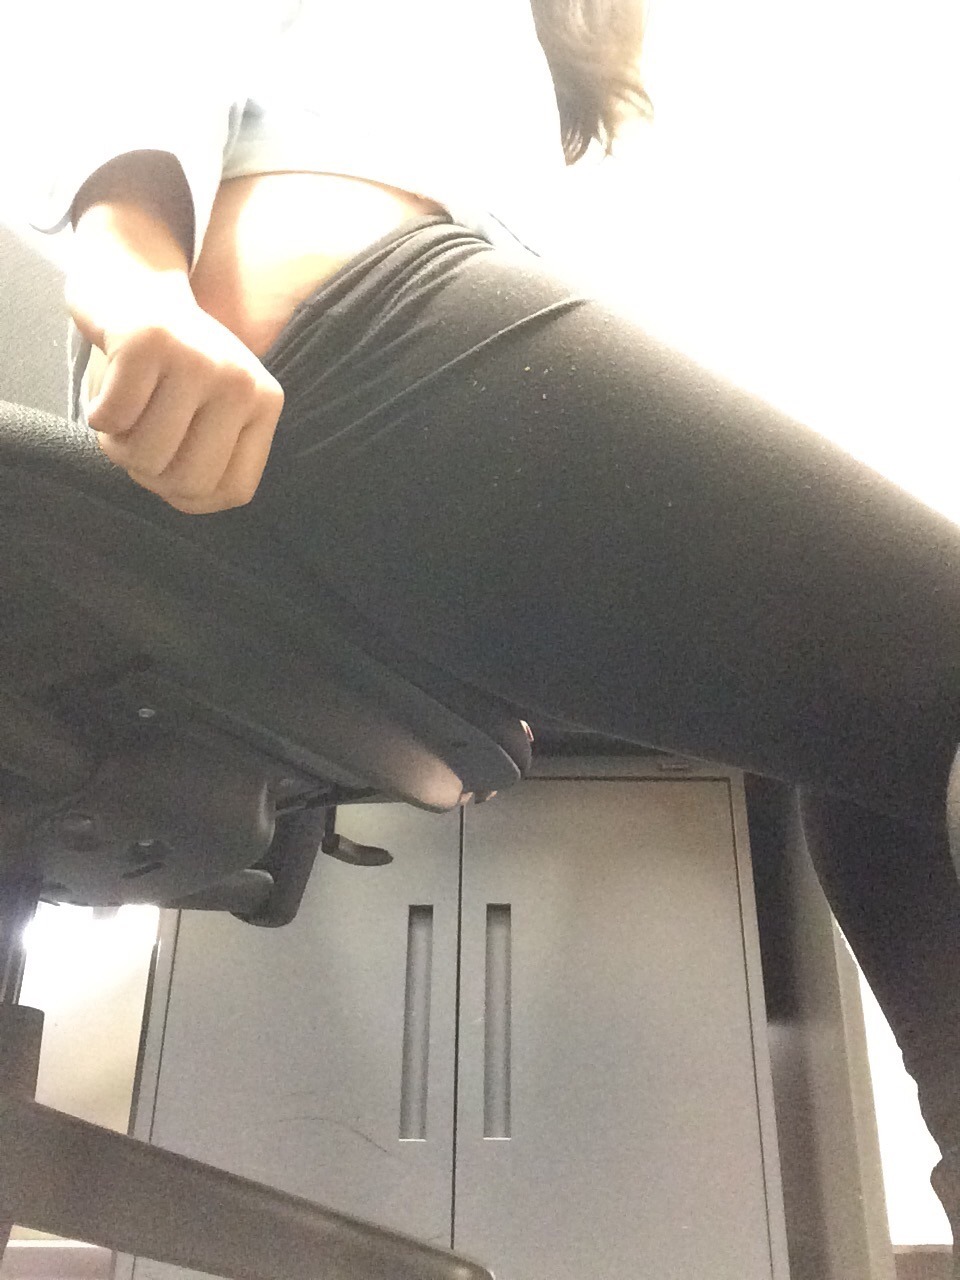 asiangirlsarethefuture:  My Asian friend was bored at work so she sent me this…